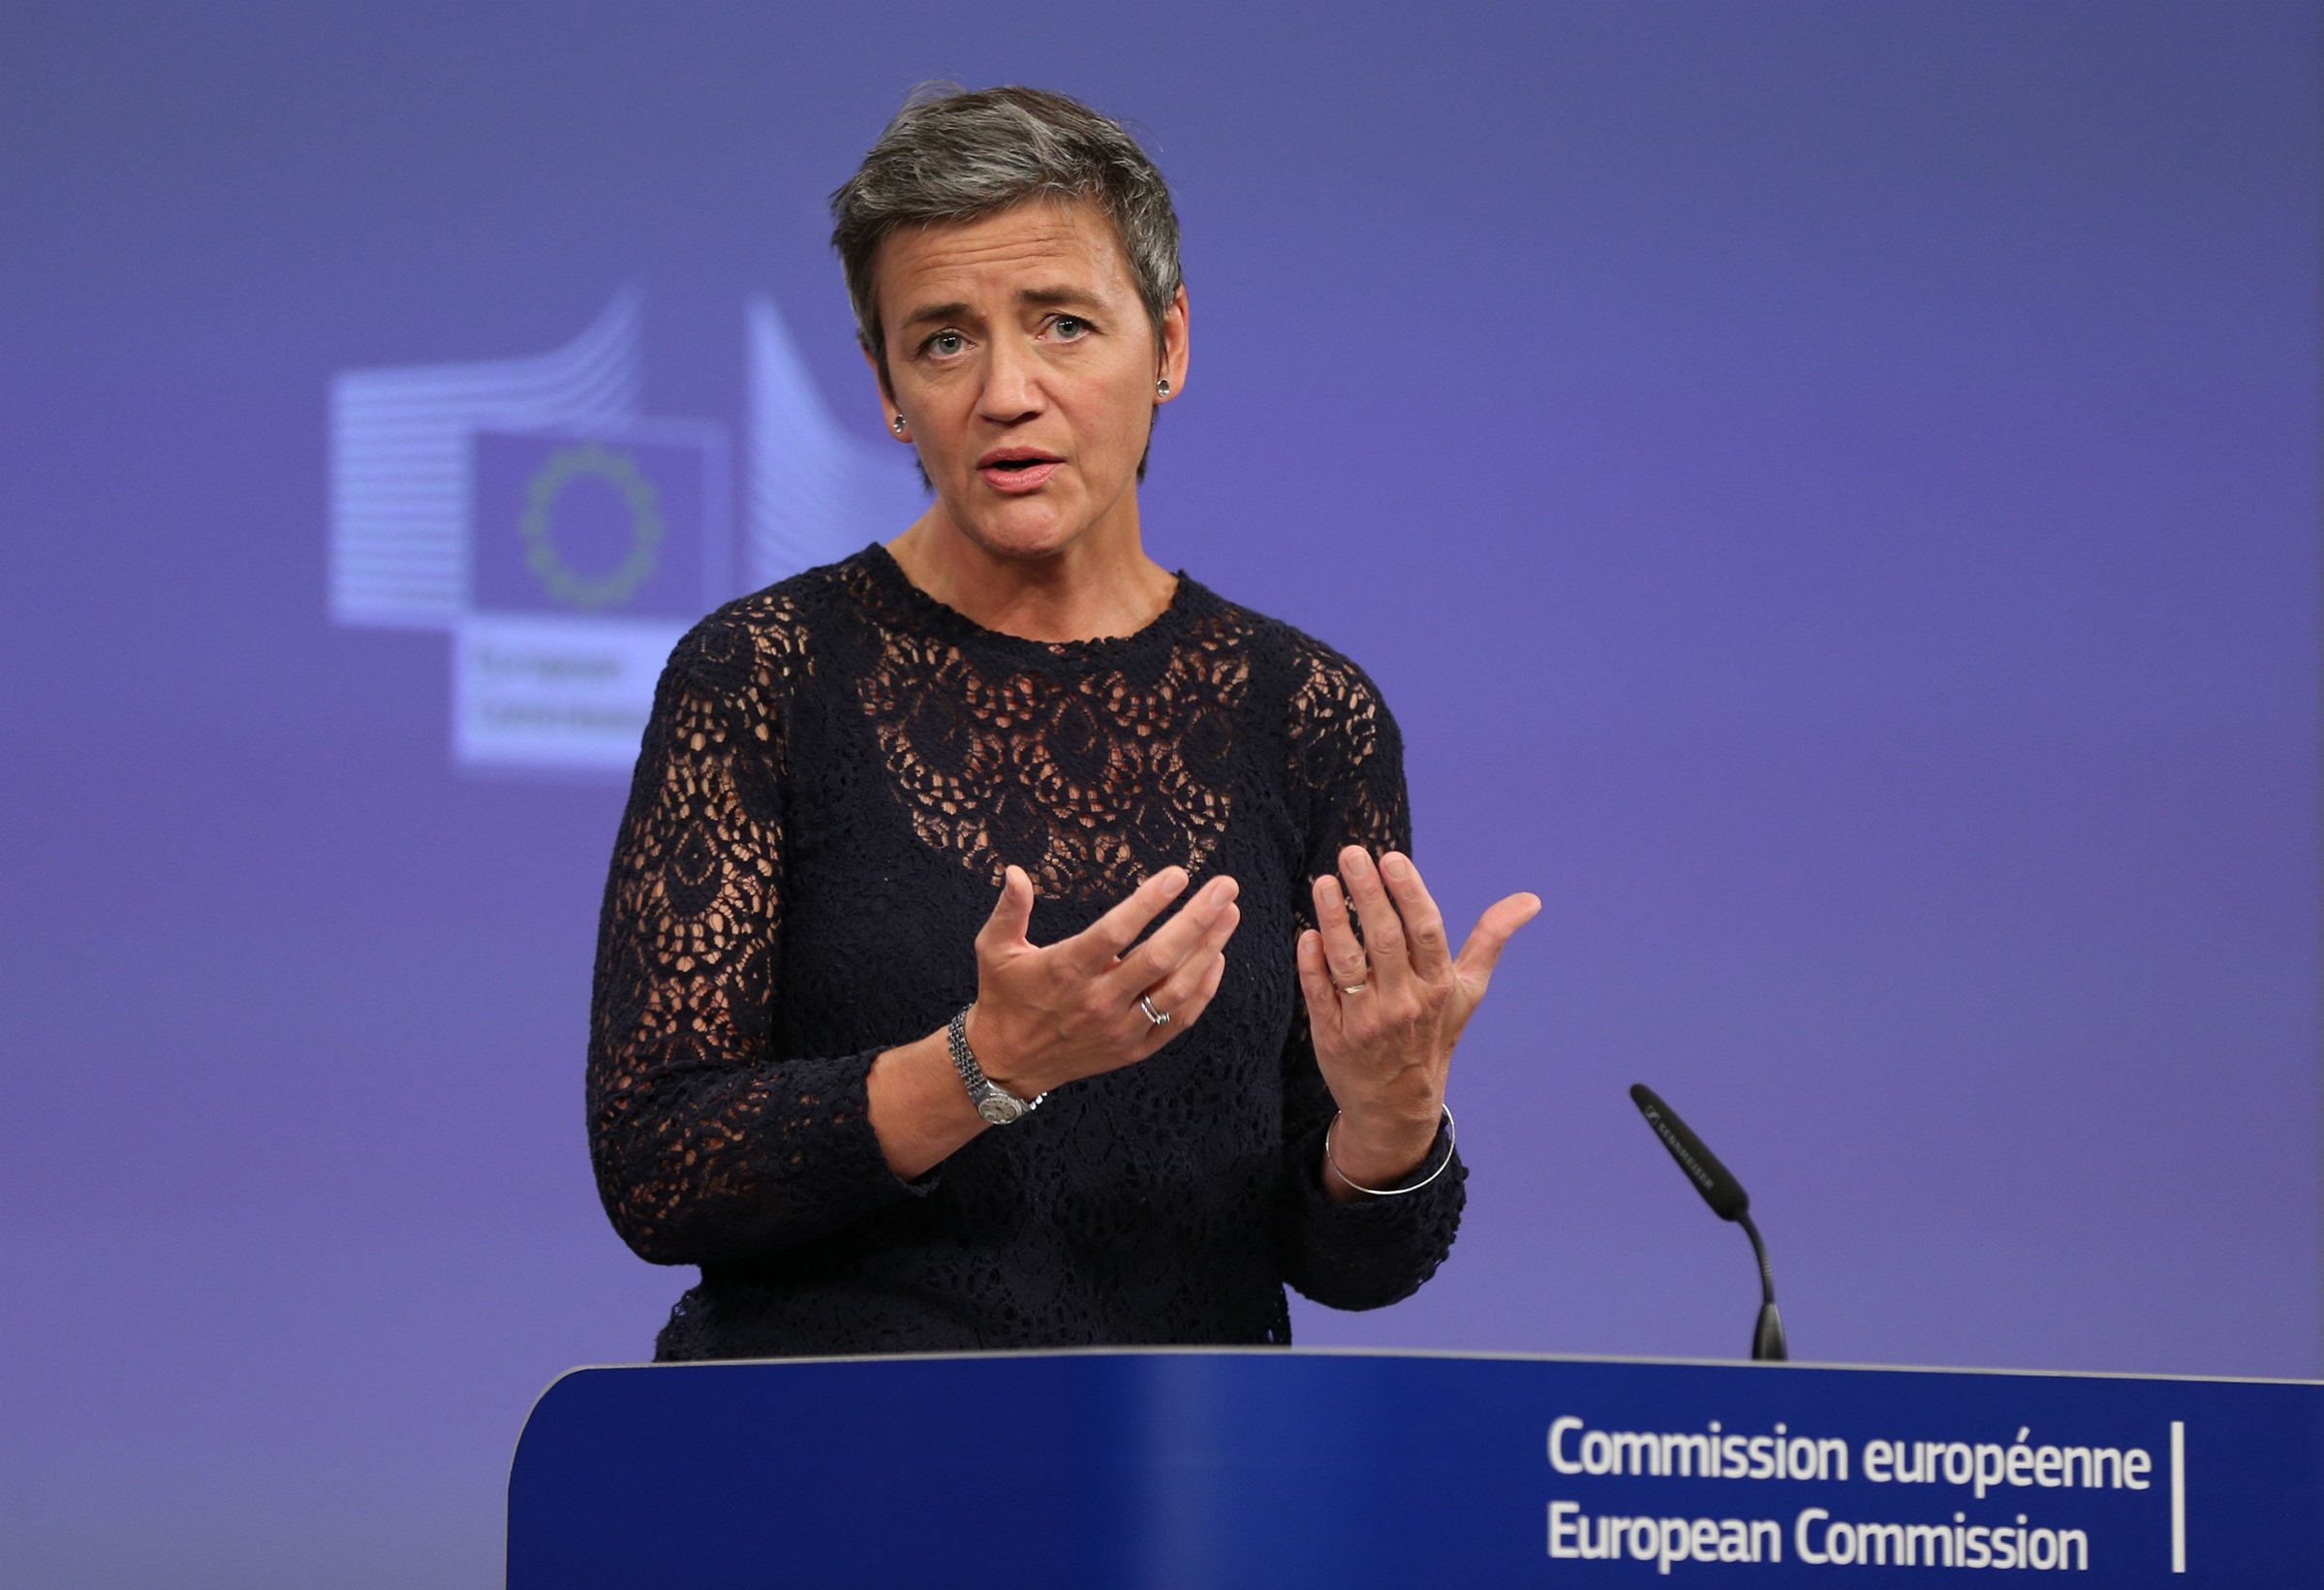 Vestager made headlines in 2016 for ruling Apple owed Ireland around $14.5 billion in back taxes